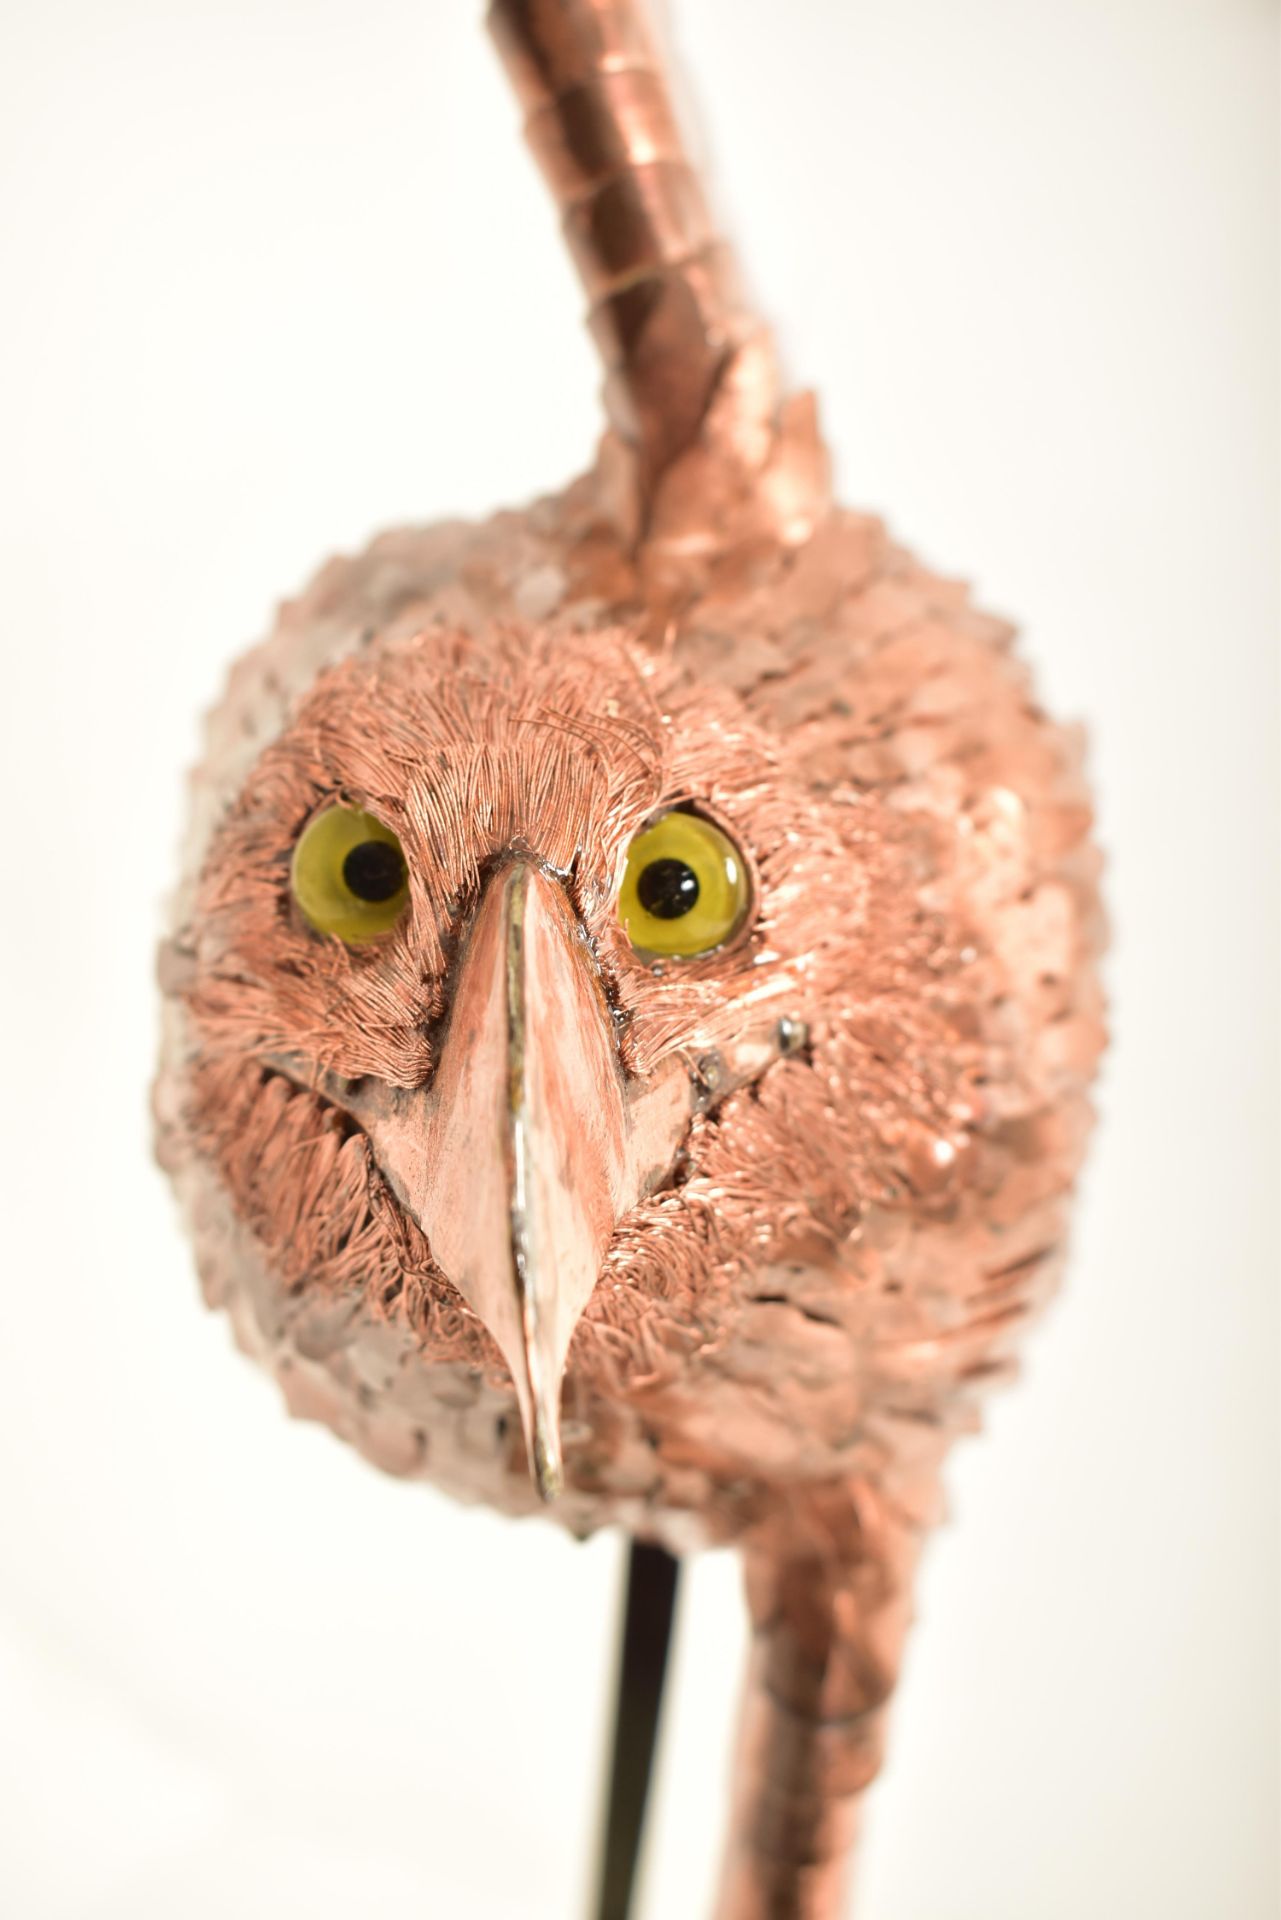 BOB ROWLEY - CONTEMPORARY COPPER WORKED RED KITE SCULPTURE - Image 6 of 6